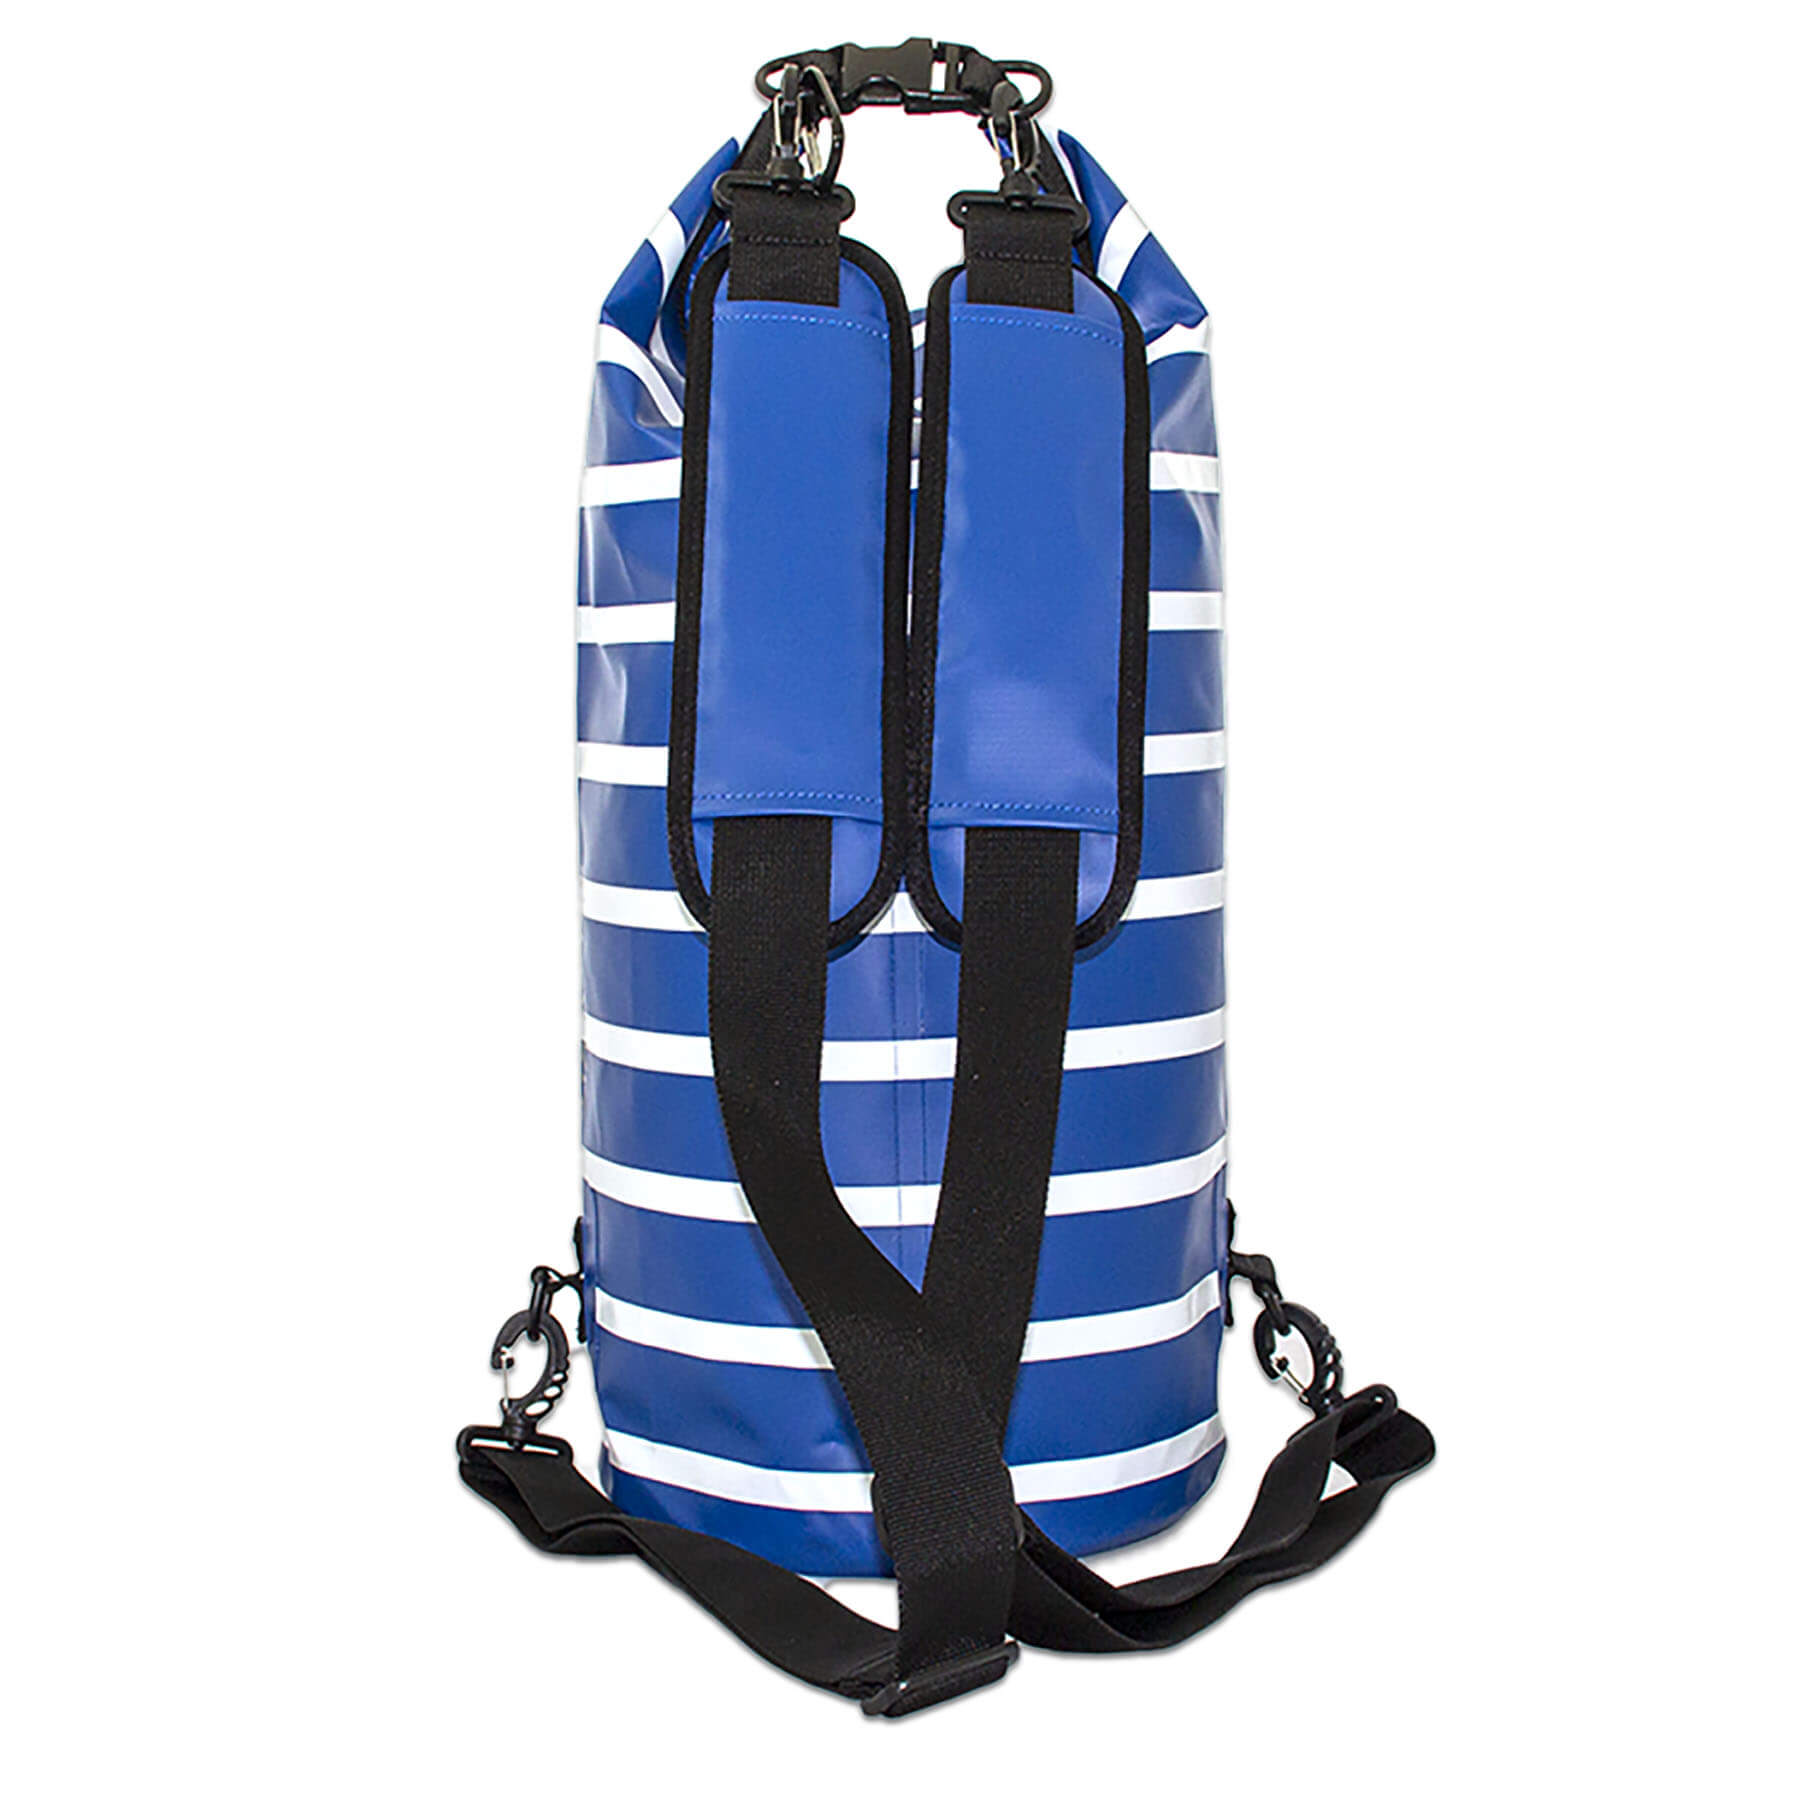 waterproof dry bag 20 litres with detachable comfort straps, D rings and handle in blue and white stripe design back view